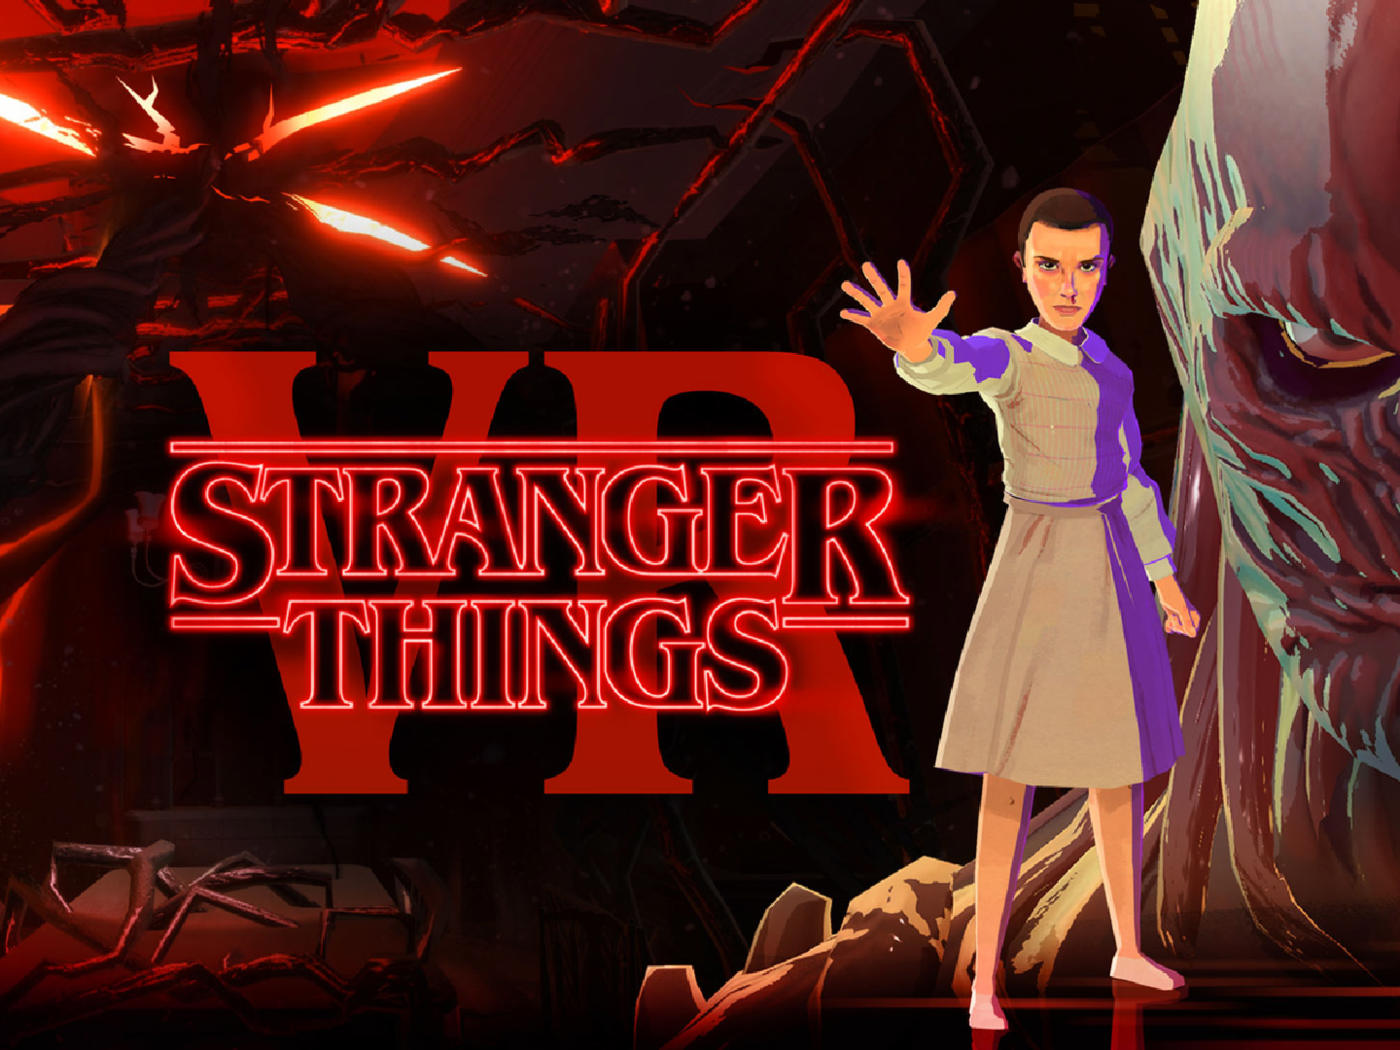 Stranger Things VR Game Introduction - A Journey Through The Upside Down